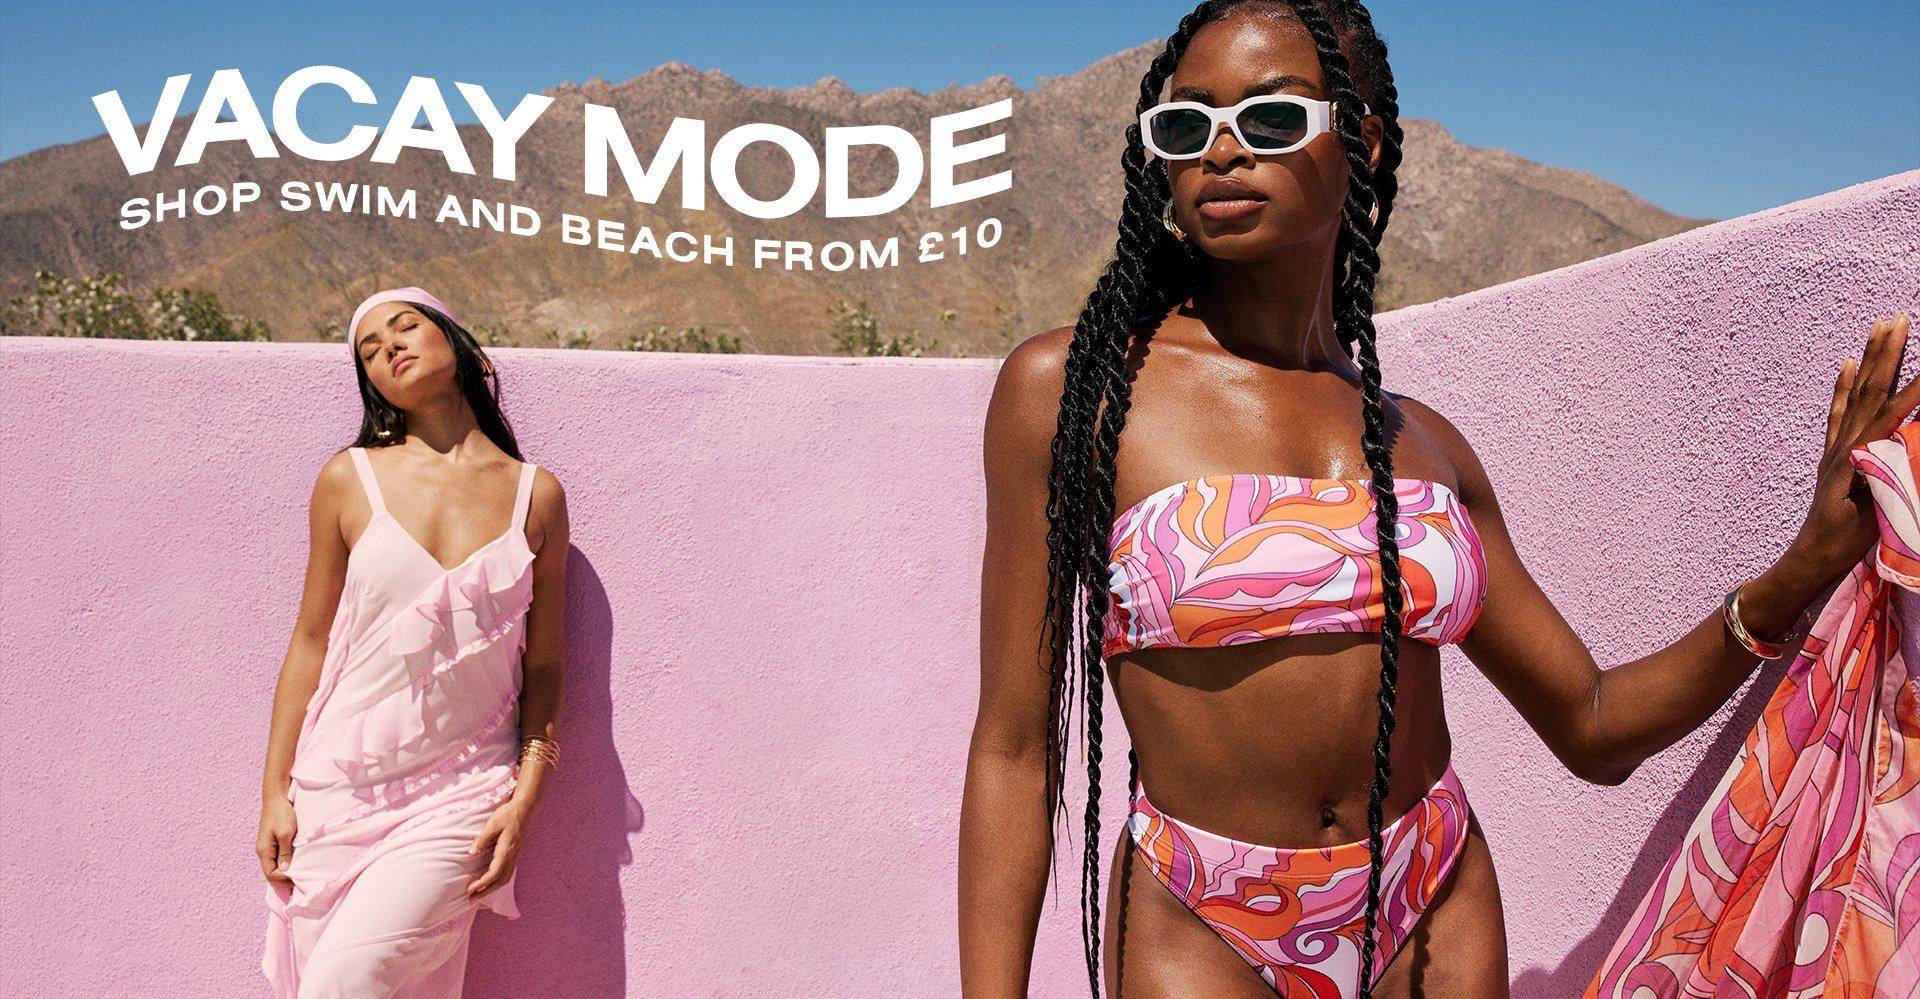 VACAY MODE SHOP SWIM AND BEACH FROM £10